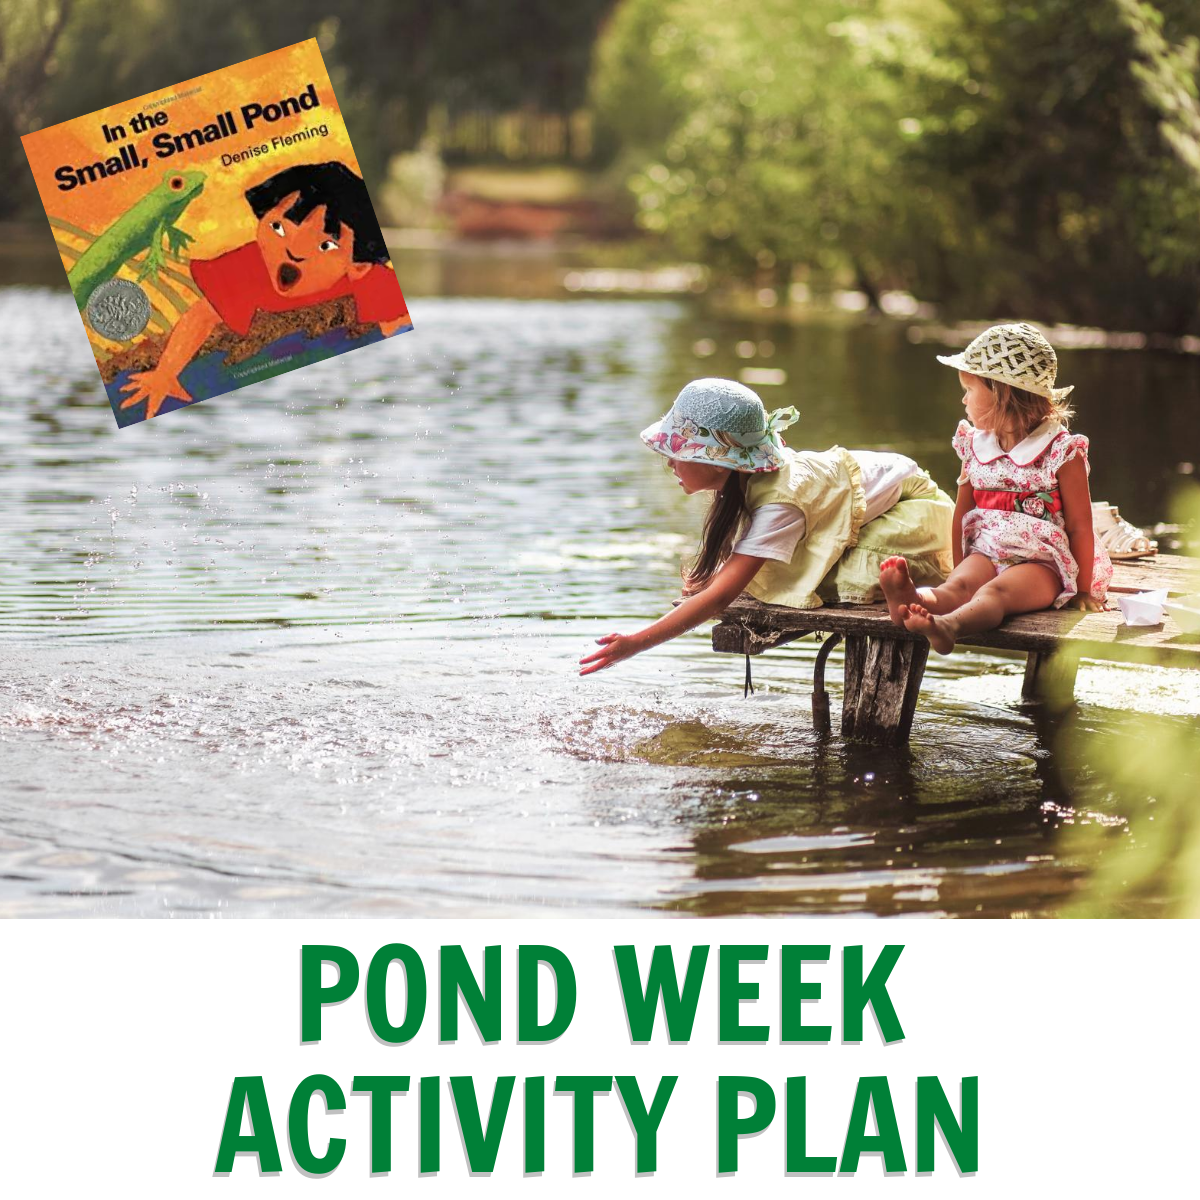 children looking in a pond with the book cover In a small, small pond by Denise Fleming text below the inmage reads Pond Week Activity Plan